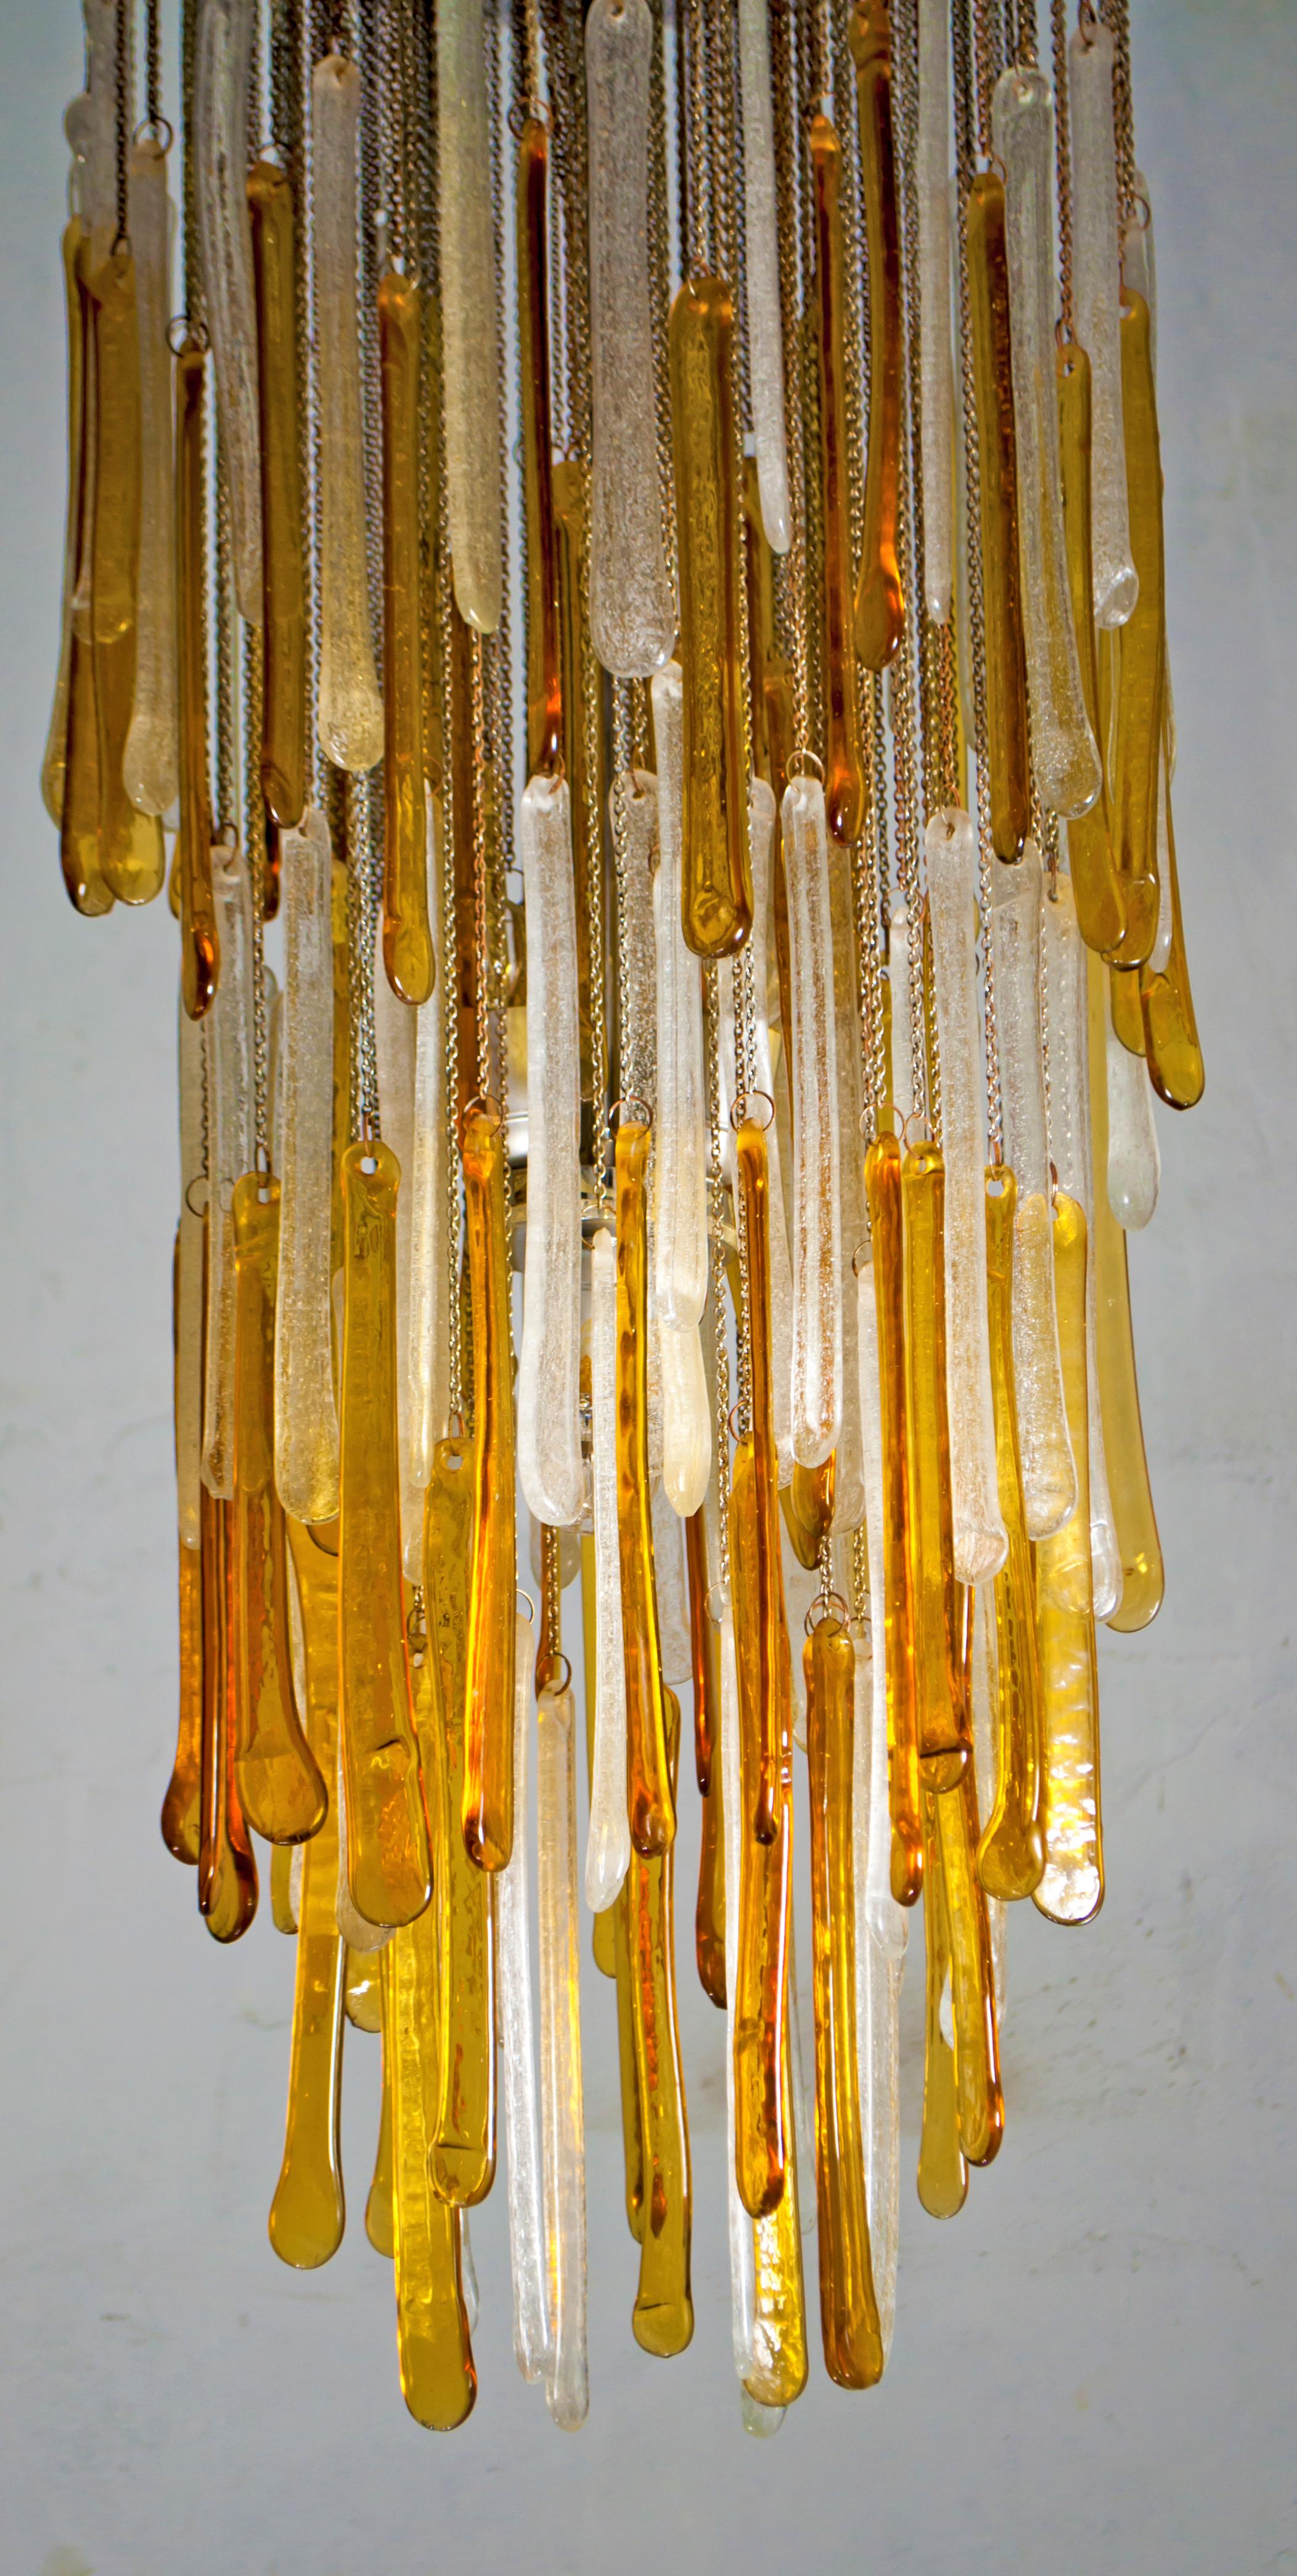 This Murano glass chandelier was produced by Mazzega in Pulegoso glass, the structure is in chromed metal.
Amber and transparent color, Italy, 1960s.

The historic glassworks Mazzega IVR was the architect, since the mid-1950s, of a profound artistic